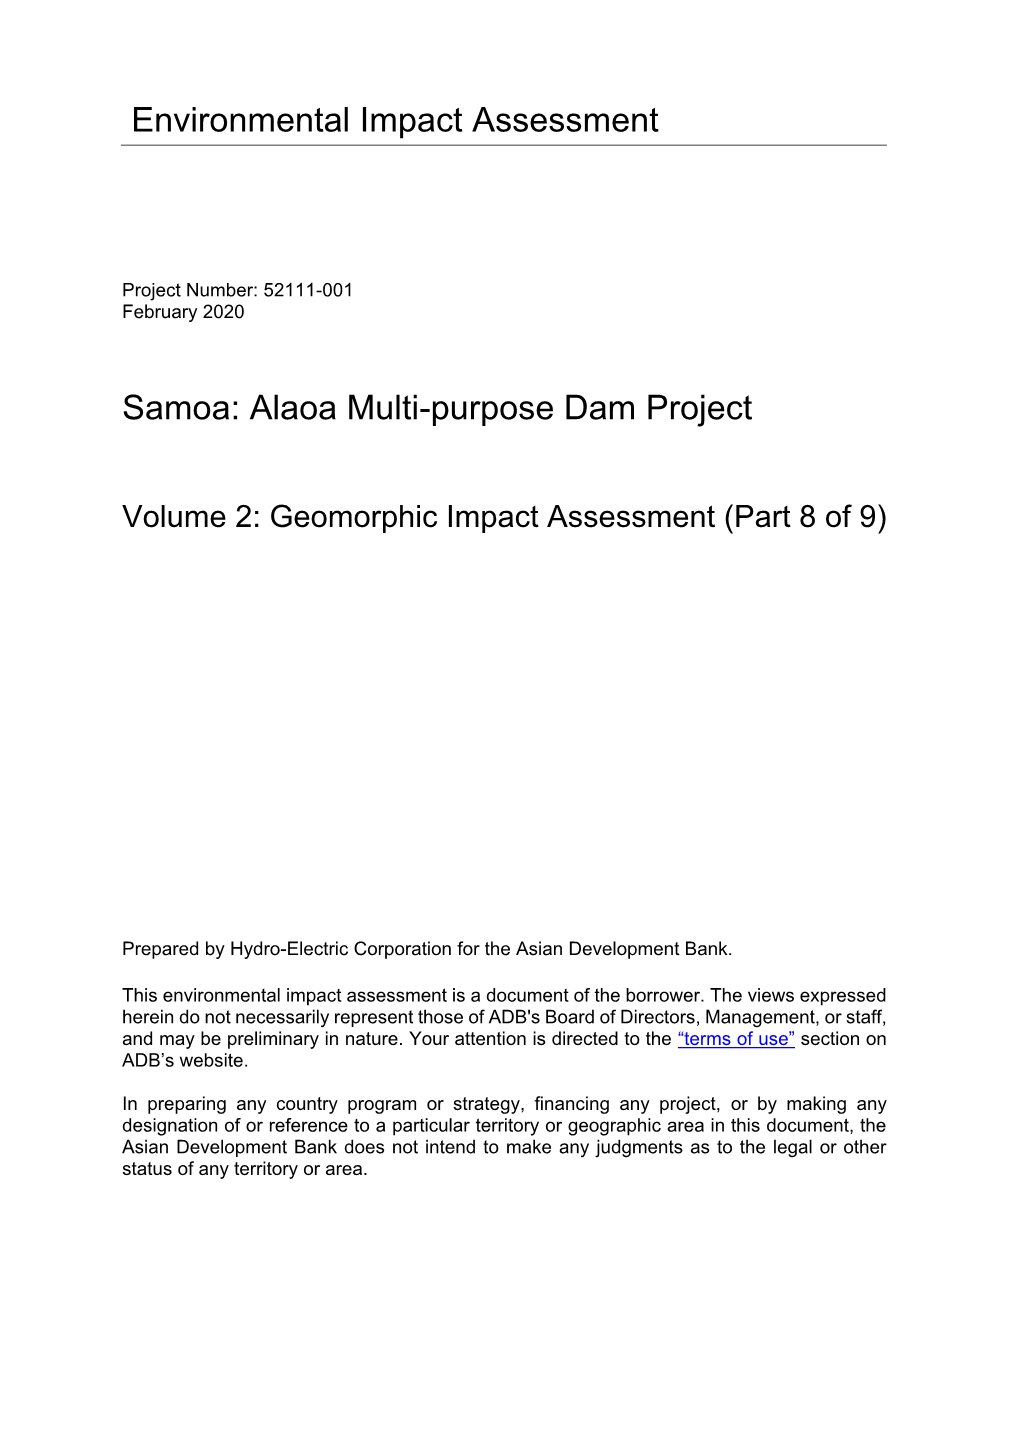 Geomorphic Impact Assessment (Part 8 of 9)